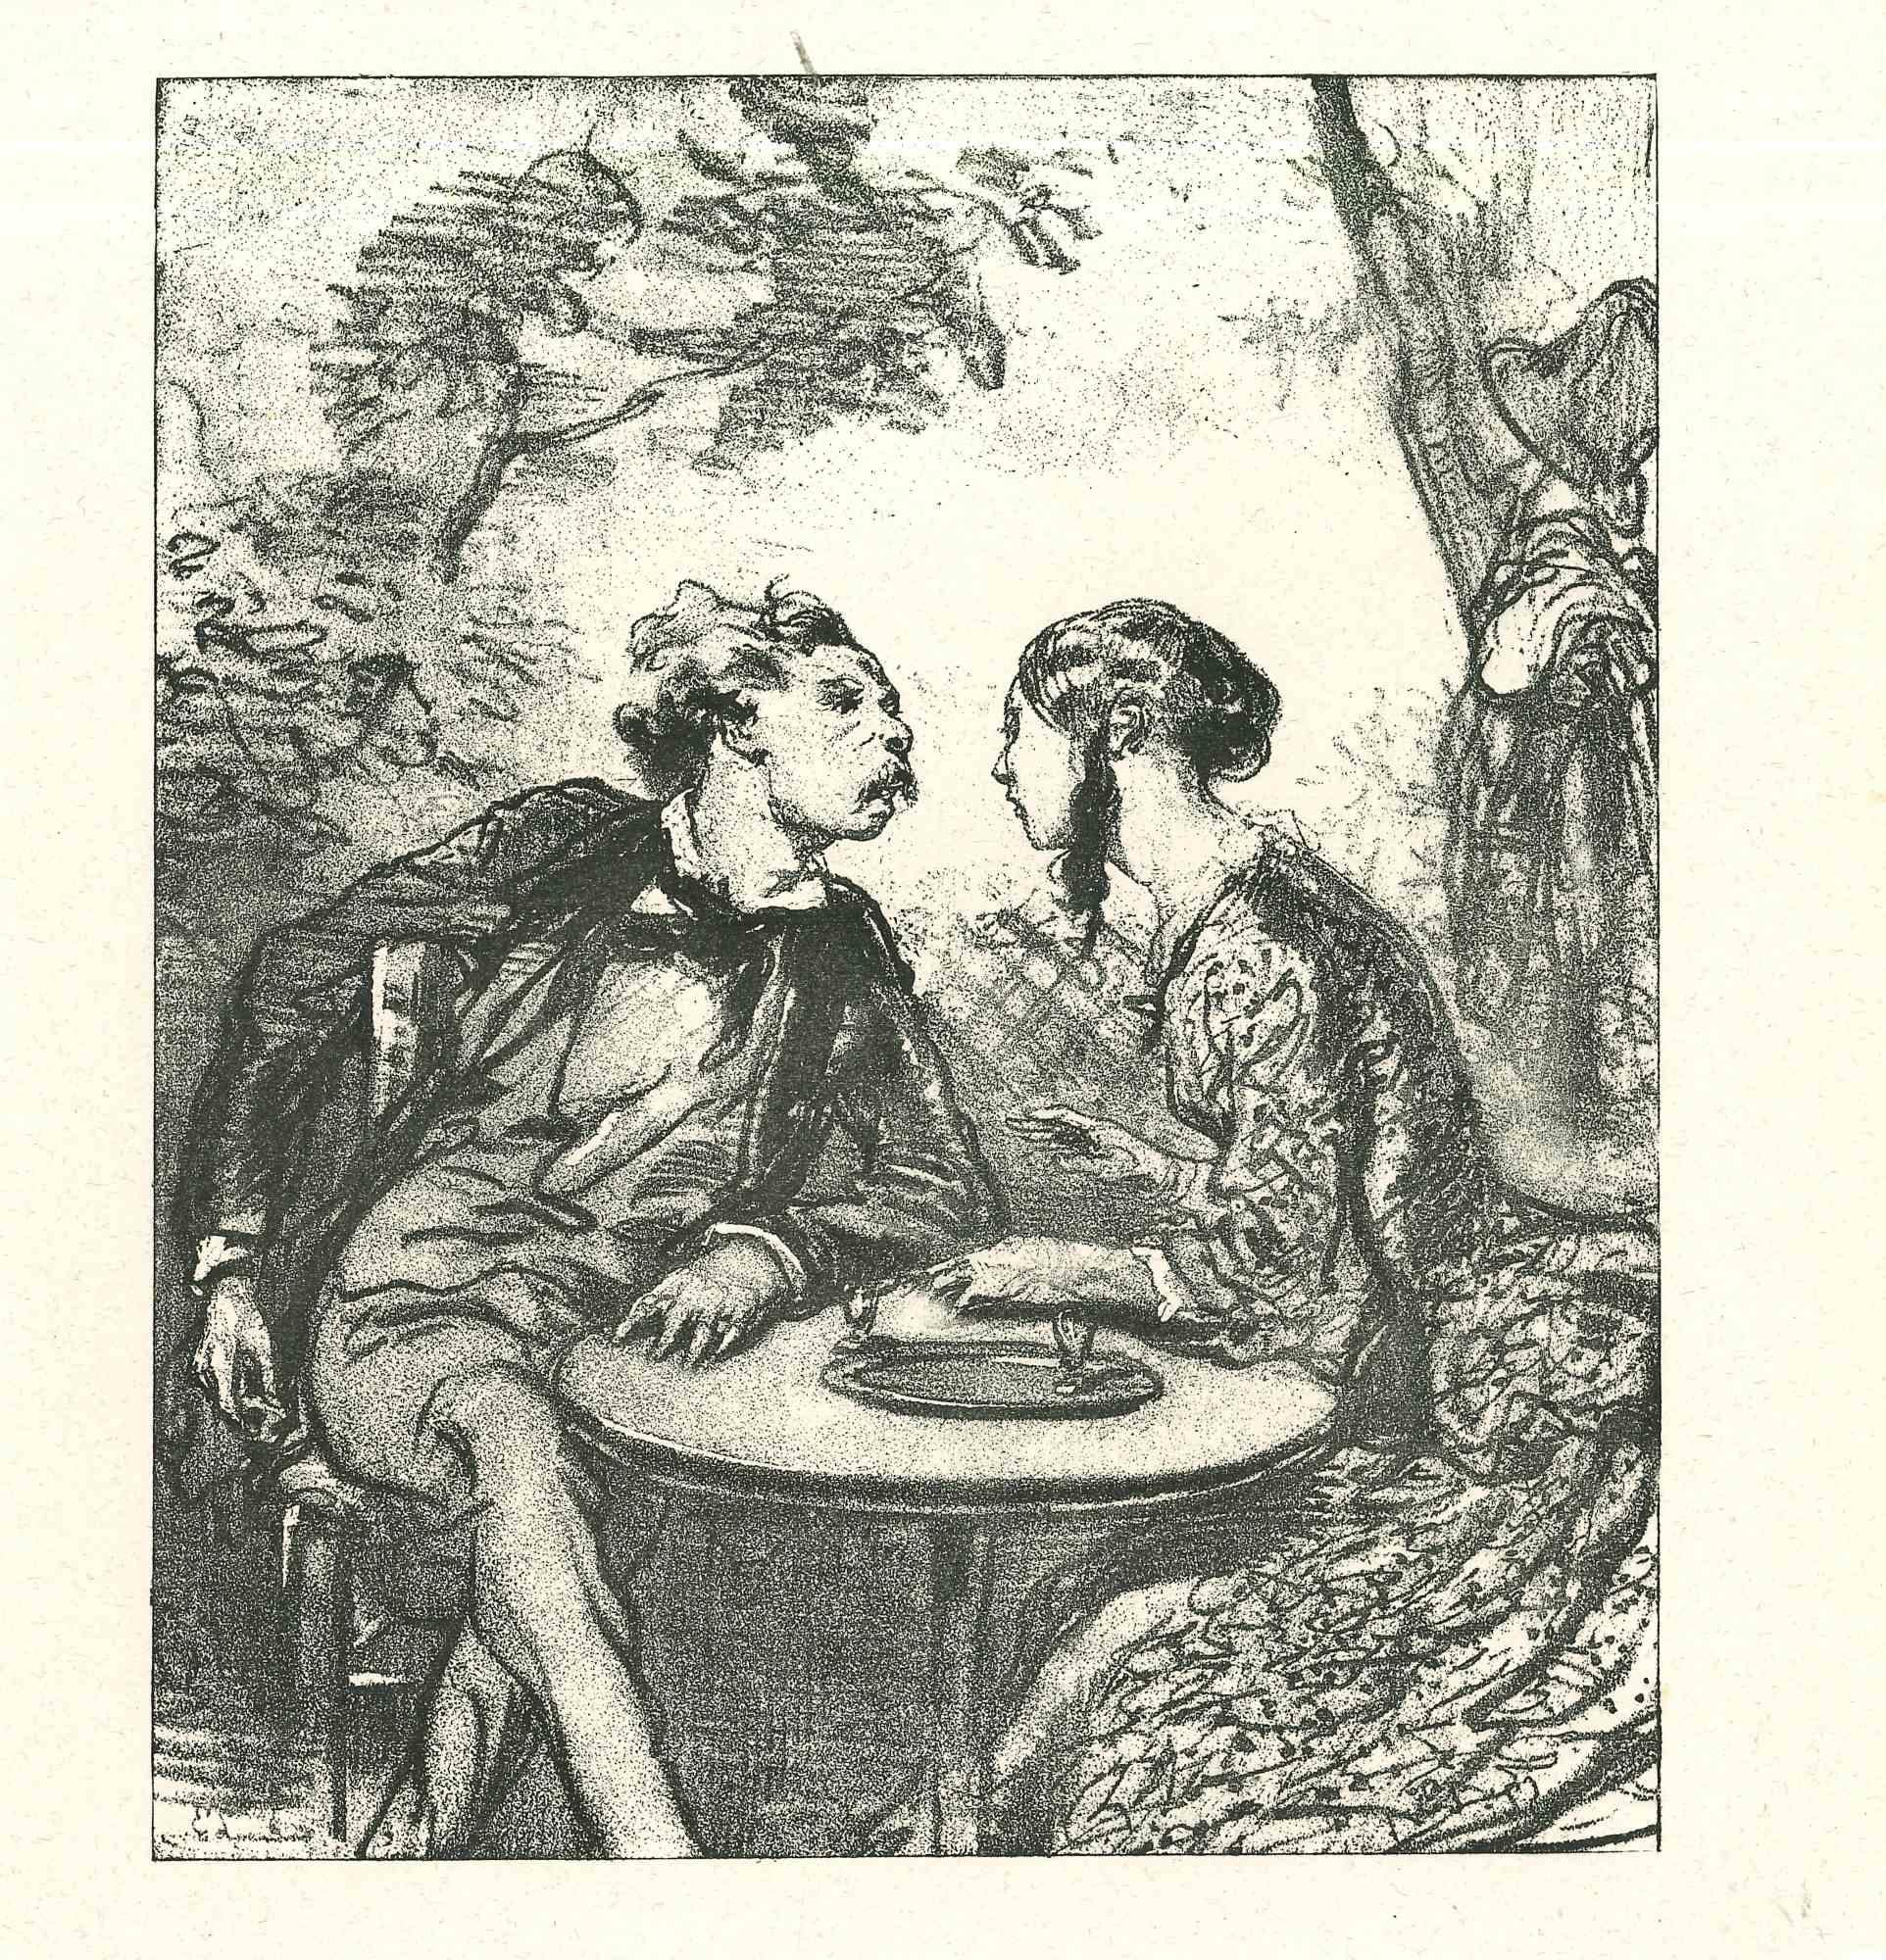 The affection is an original lithograph artwork on ivory-colored paper, realized by the French draftsman Paul Gavarni (after) (alias Guillaume Sulpice Chevalier Gavarni, 1804-1866) in Paris, 1881, in the collection of Illustrations for "La Mascarade